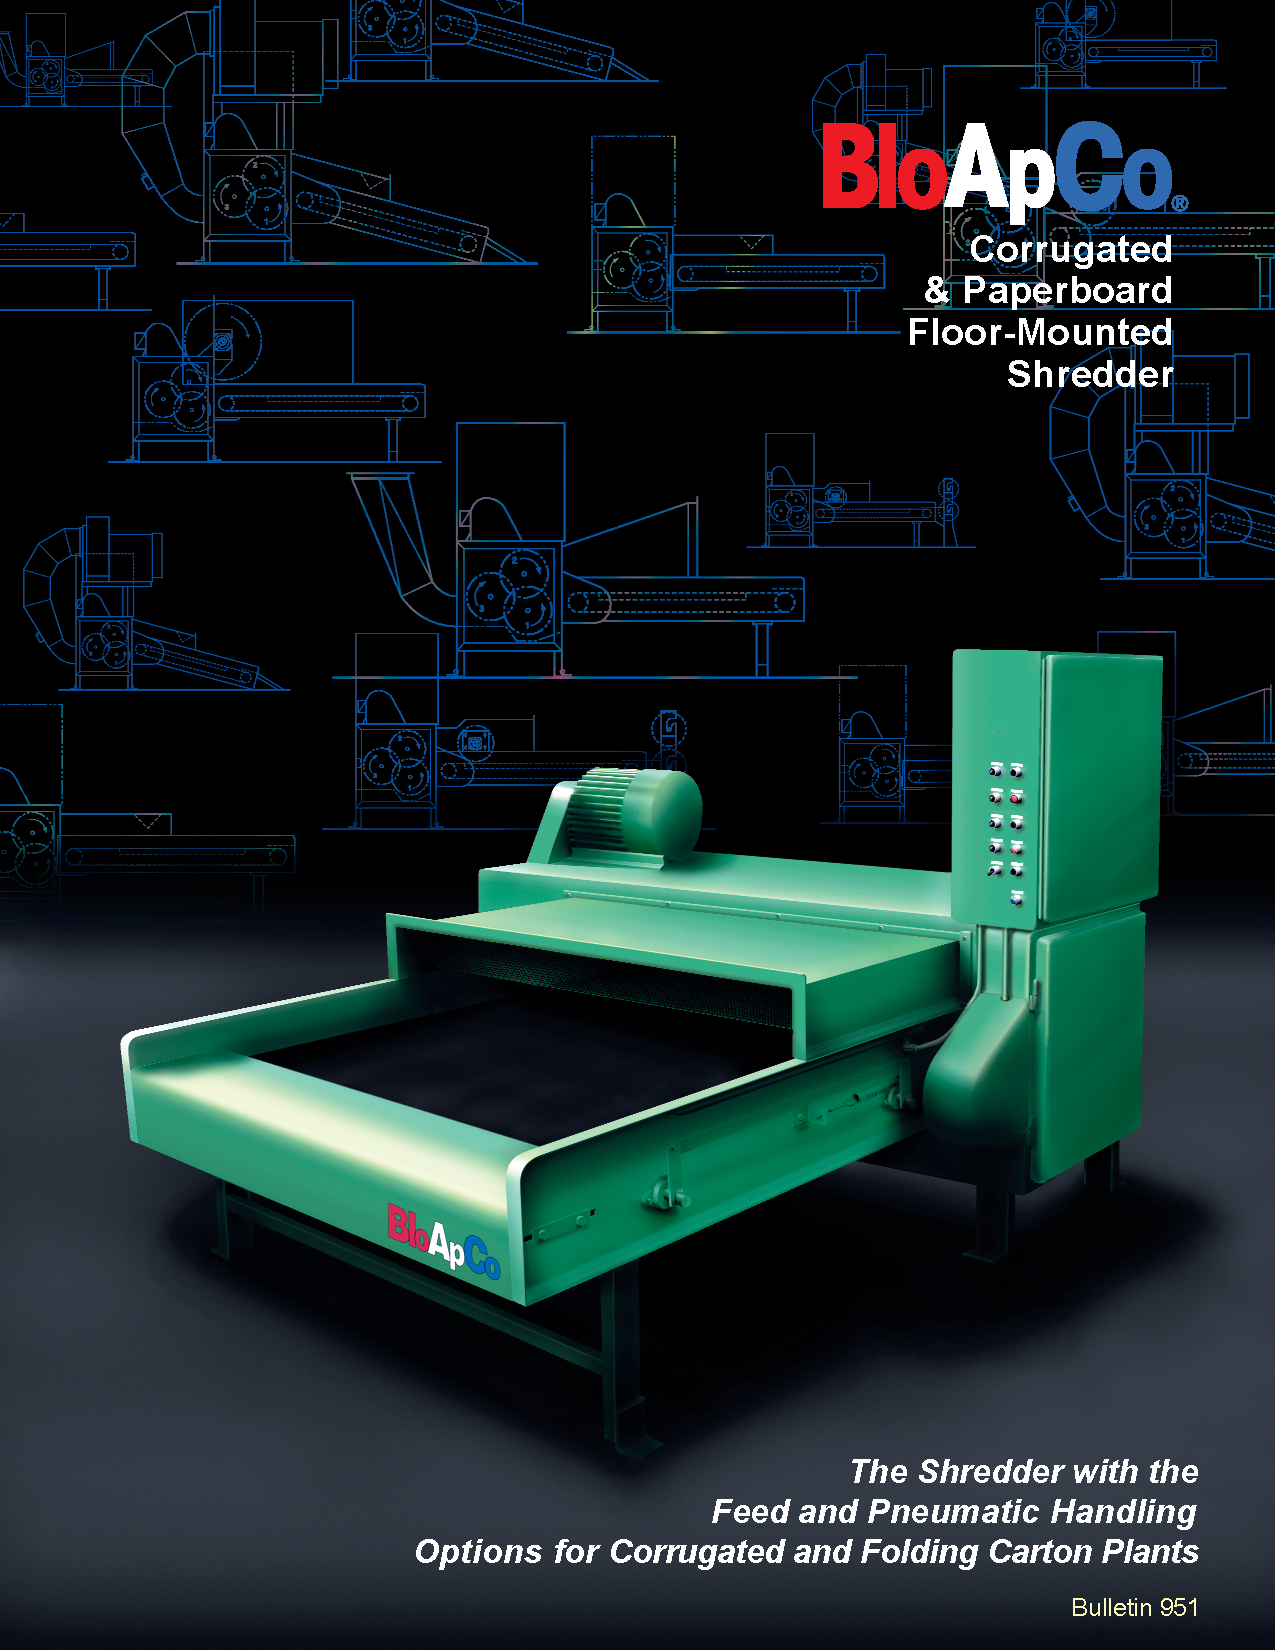 Learn more about Floor Mounted Shredders and pneumatic handling options by viewing the BloApCo Bulletin 951. 